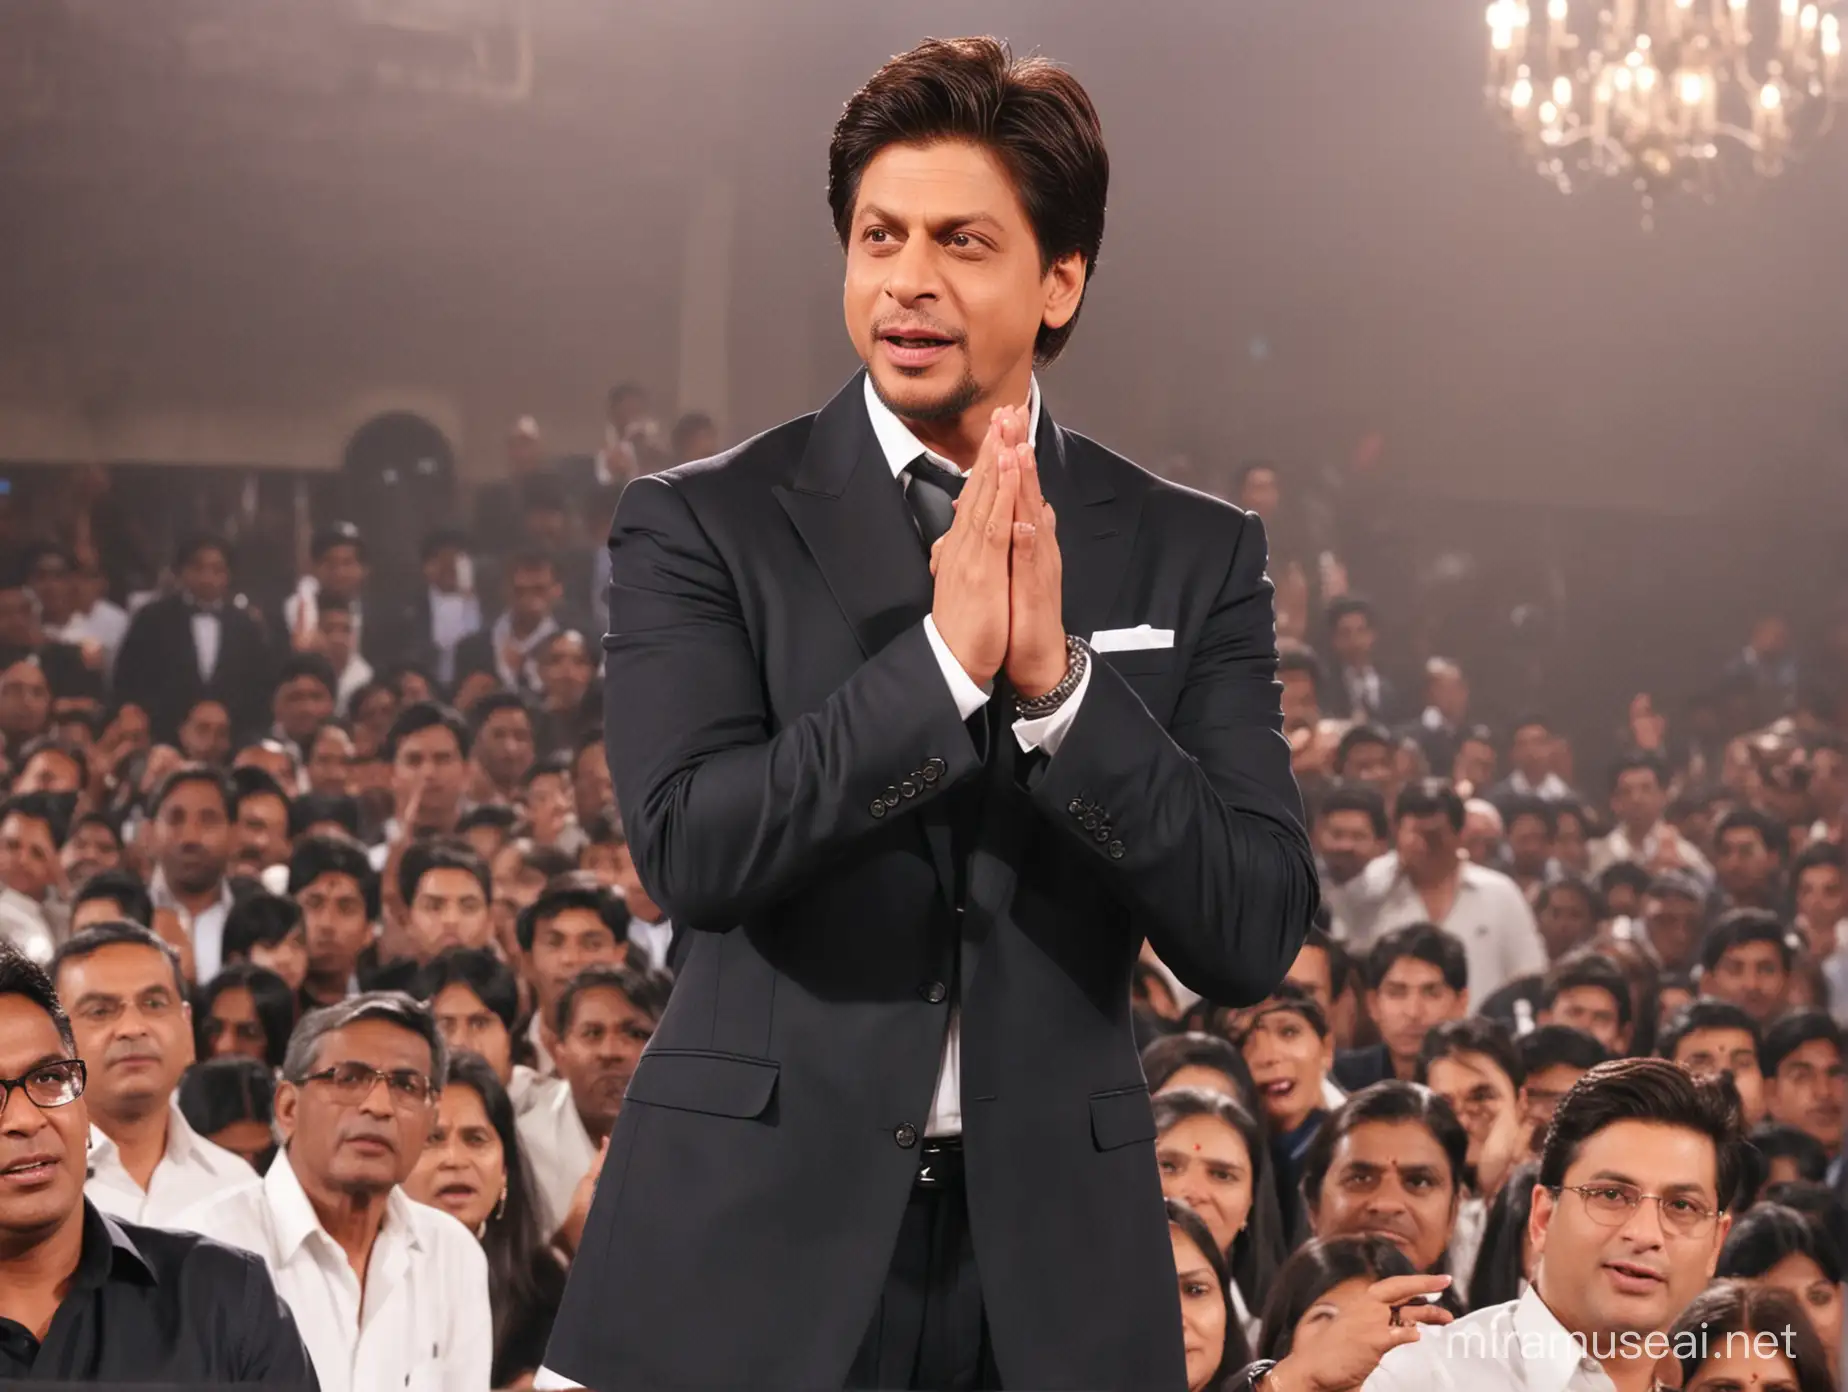 Shah rukh khan in formals is giving a motivational speech to a group of Indian people. 